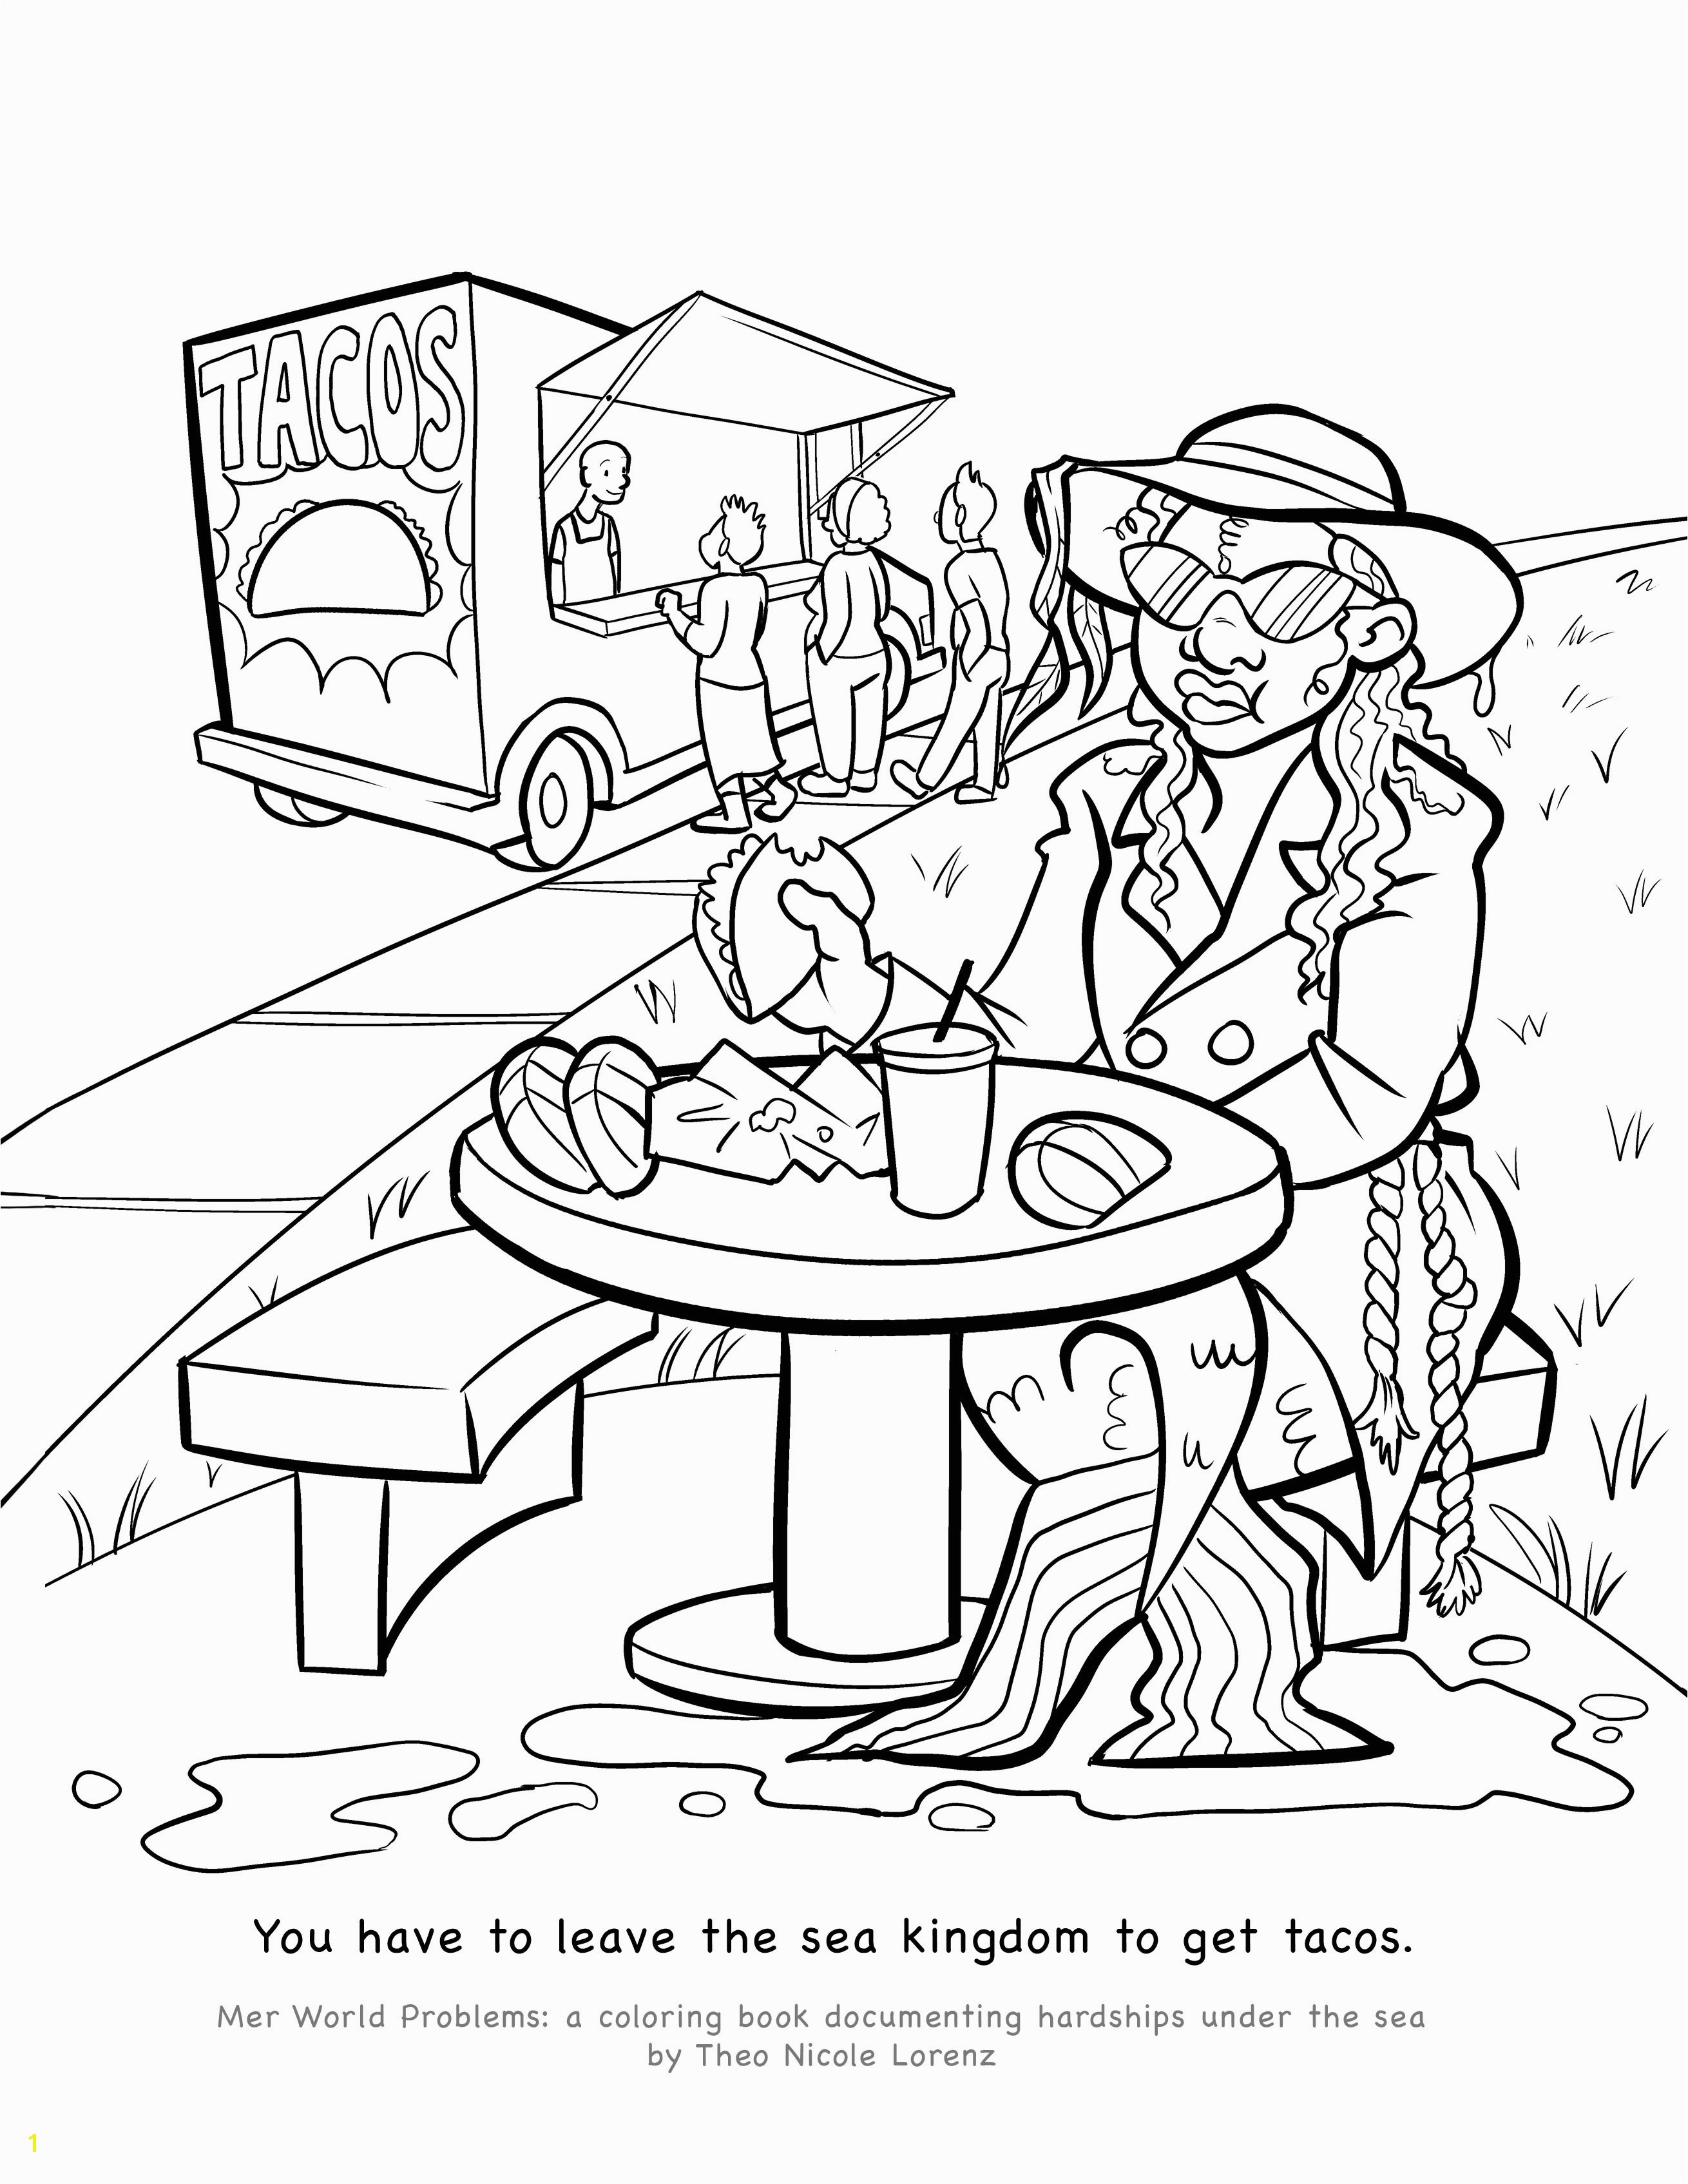 Coloring Pages Lovely Printable Cds 0d New Coloring Sheets